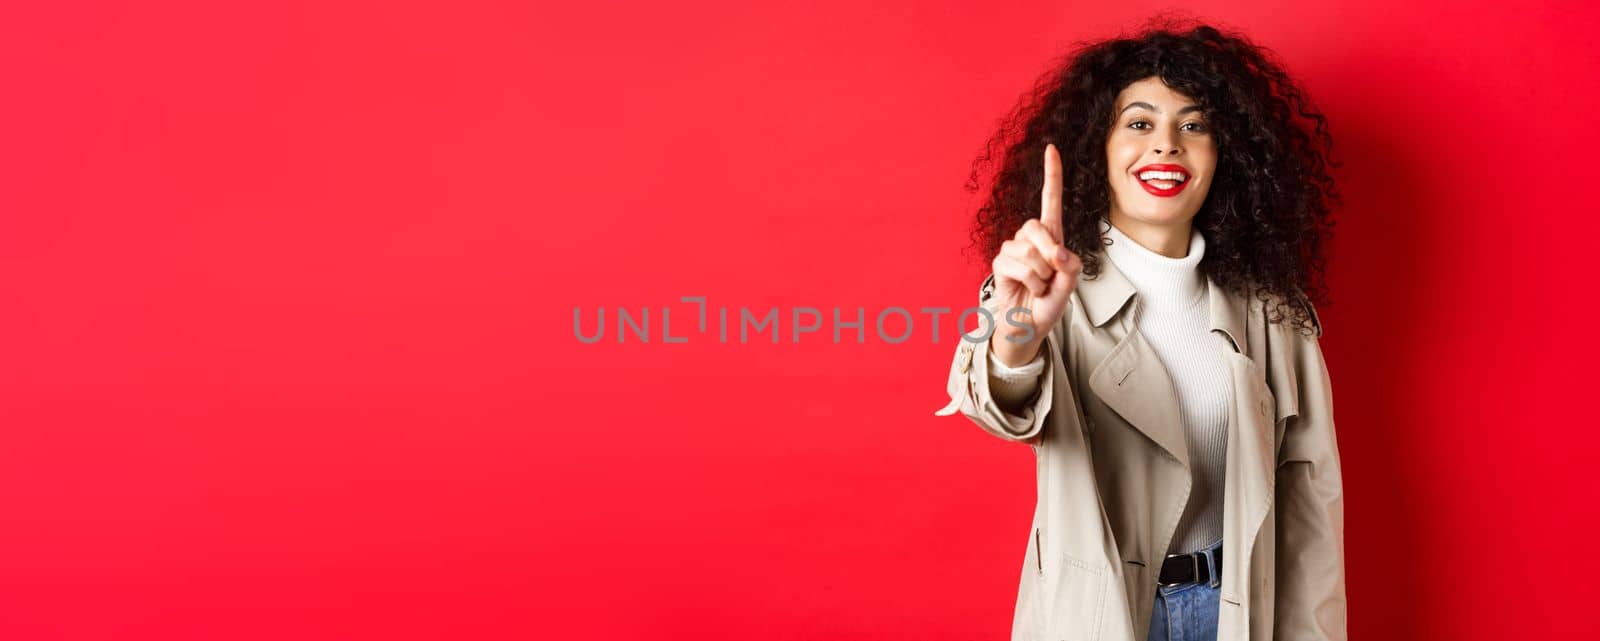 Cheerful woman in trench coat, showing number one finger and smiling, standing on red background.